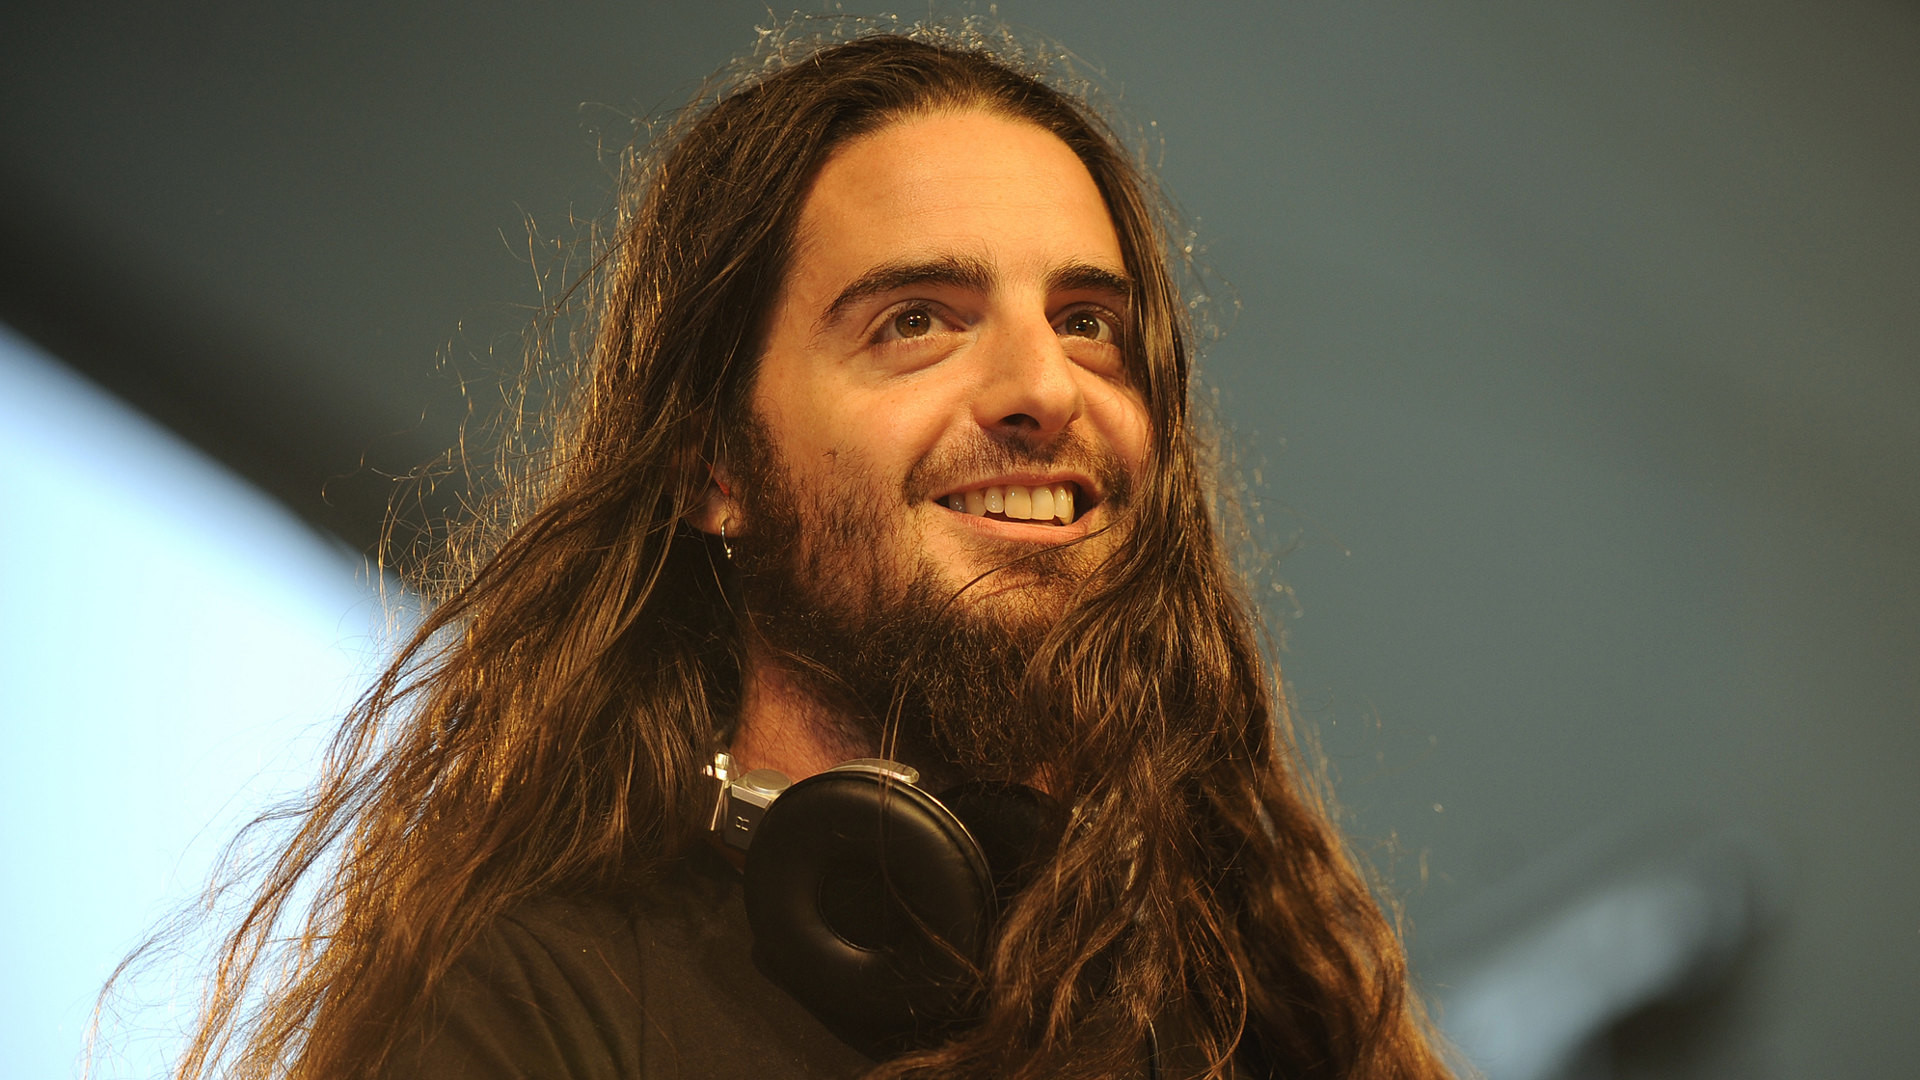 1920x1080 Bassnectar Smile HD Pictures Wallpaper 65083